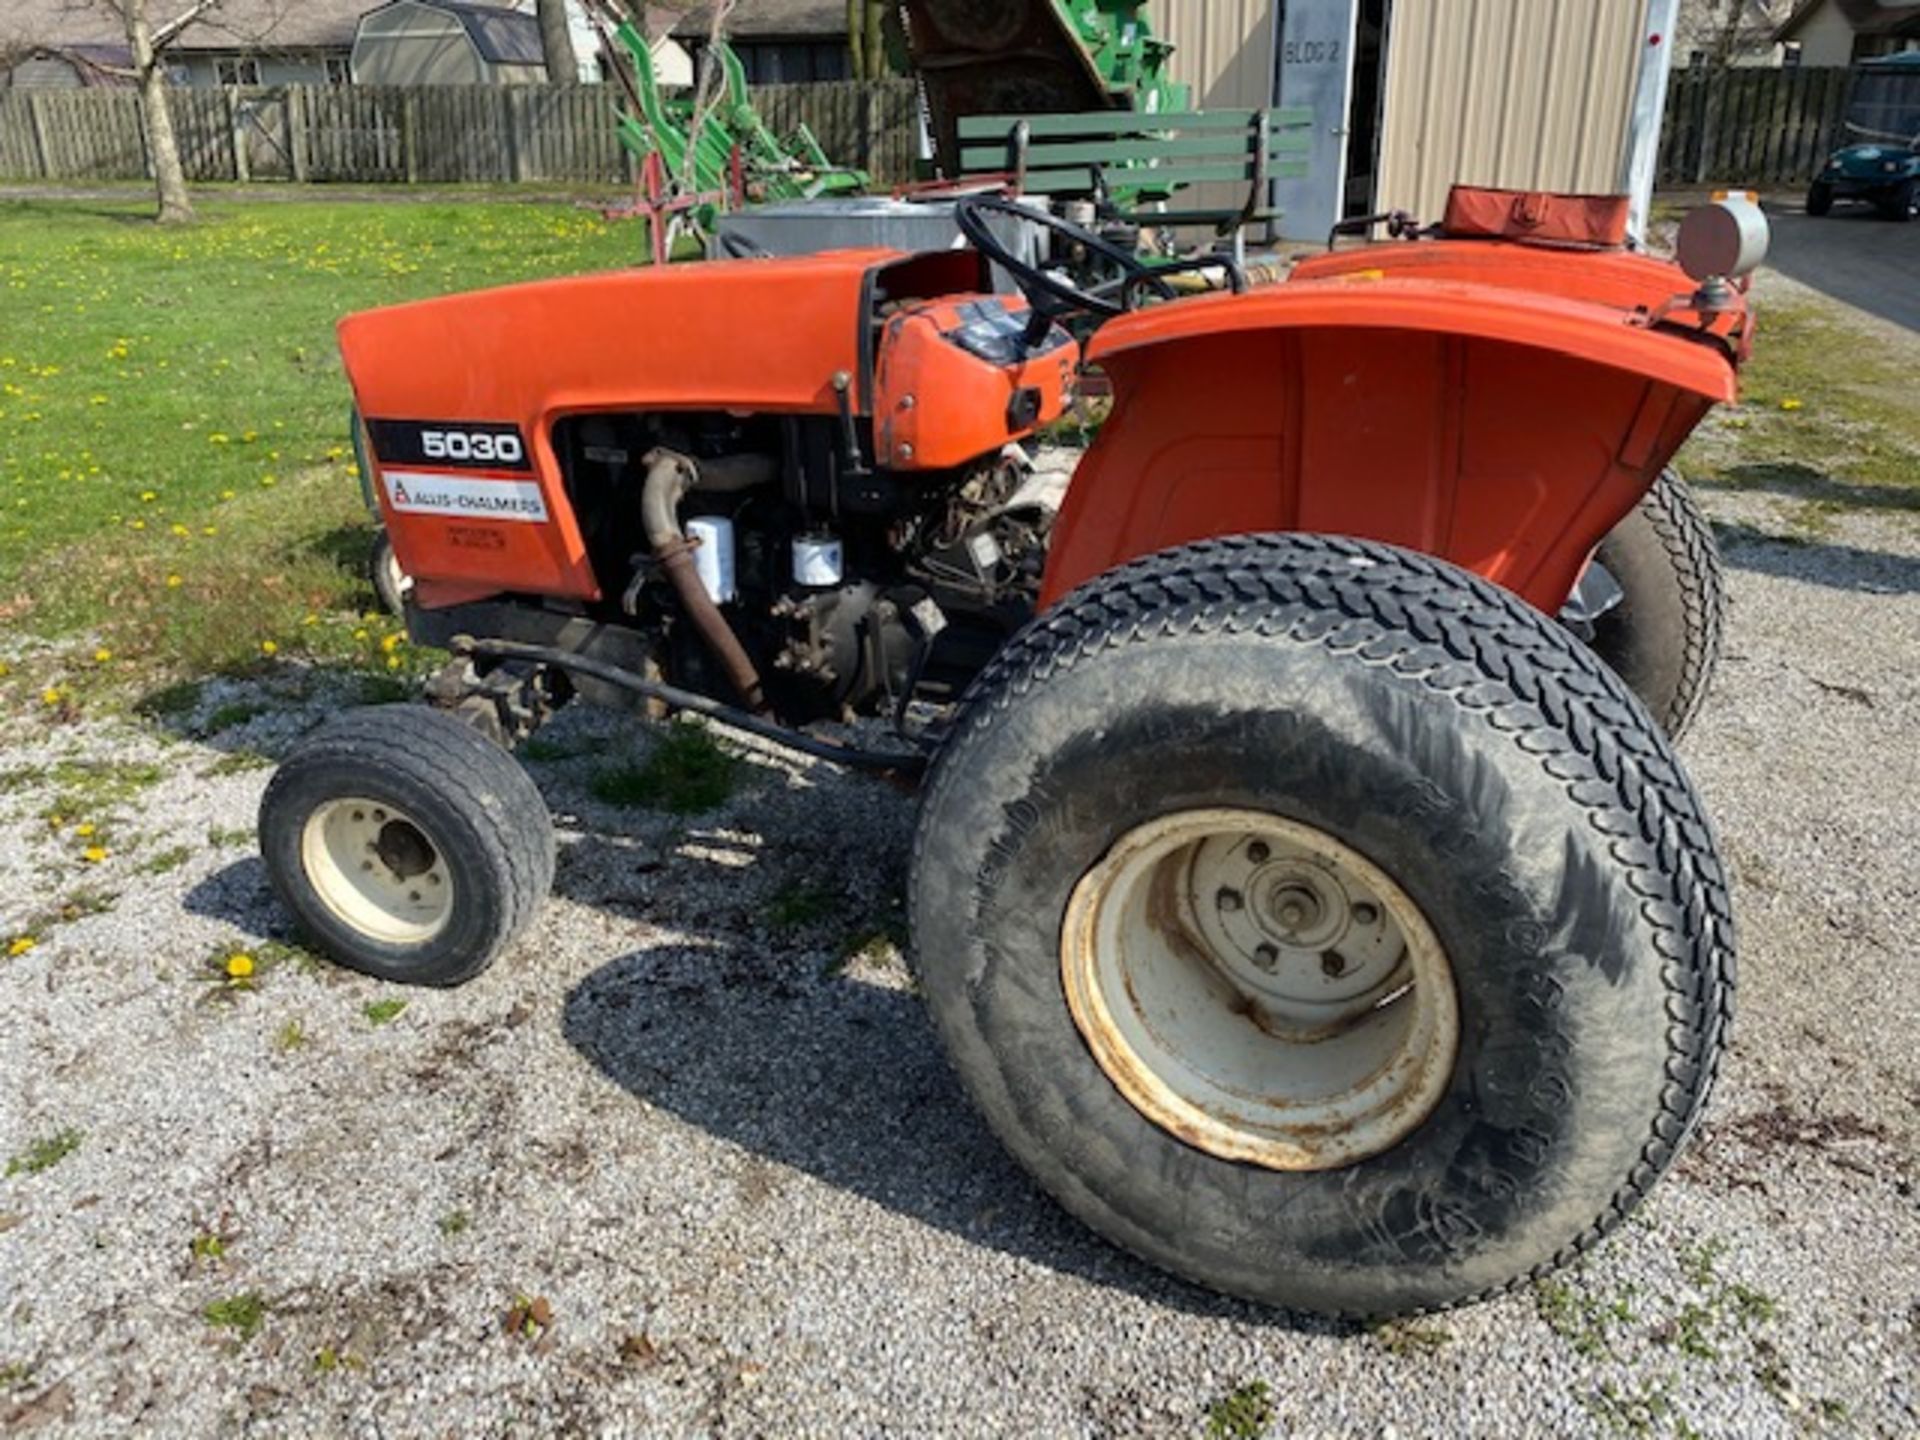 Allis-Chalmers 5030 tractor with 2204 hours, serial number 2160, needs engine work - Image 4 of 8